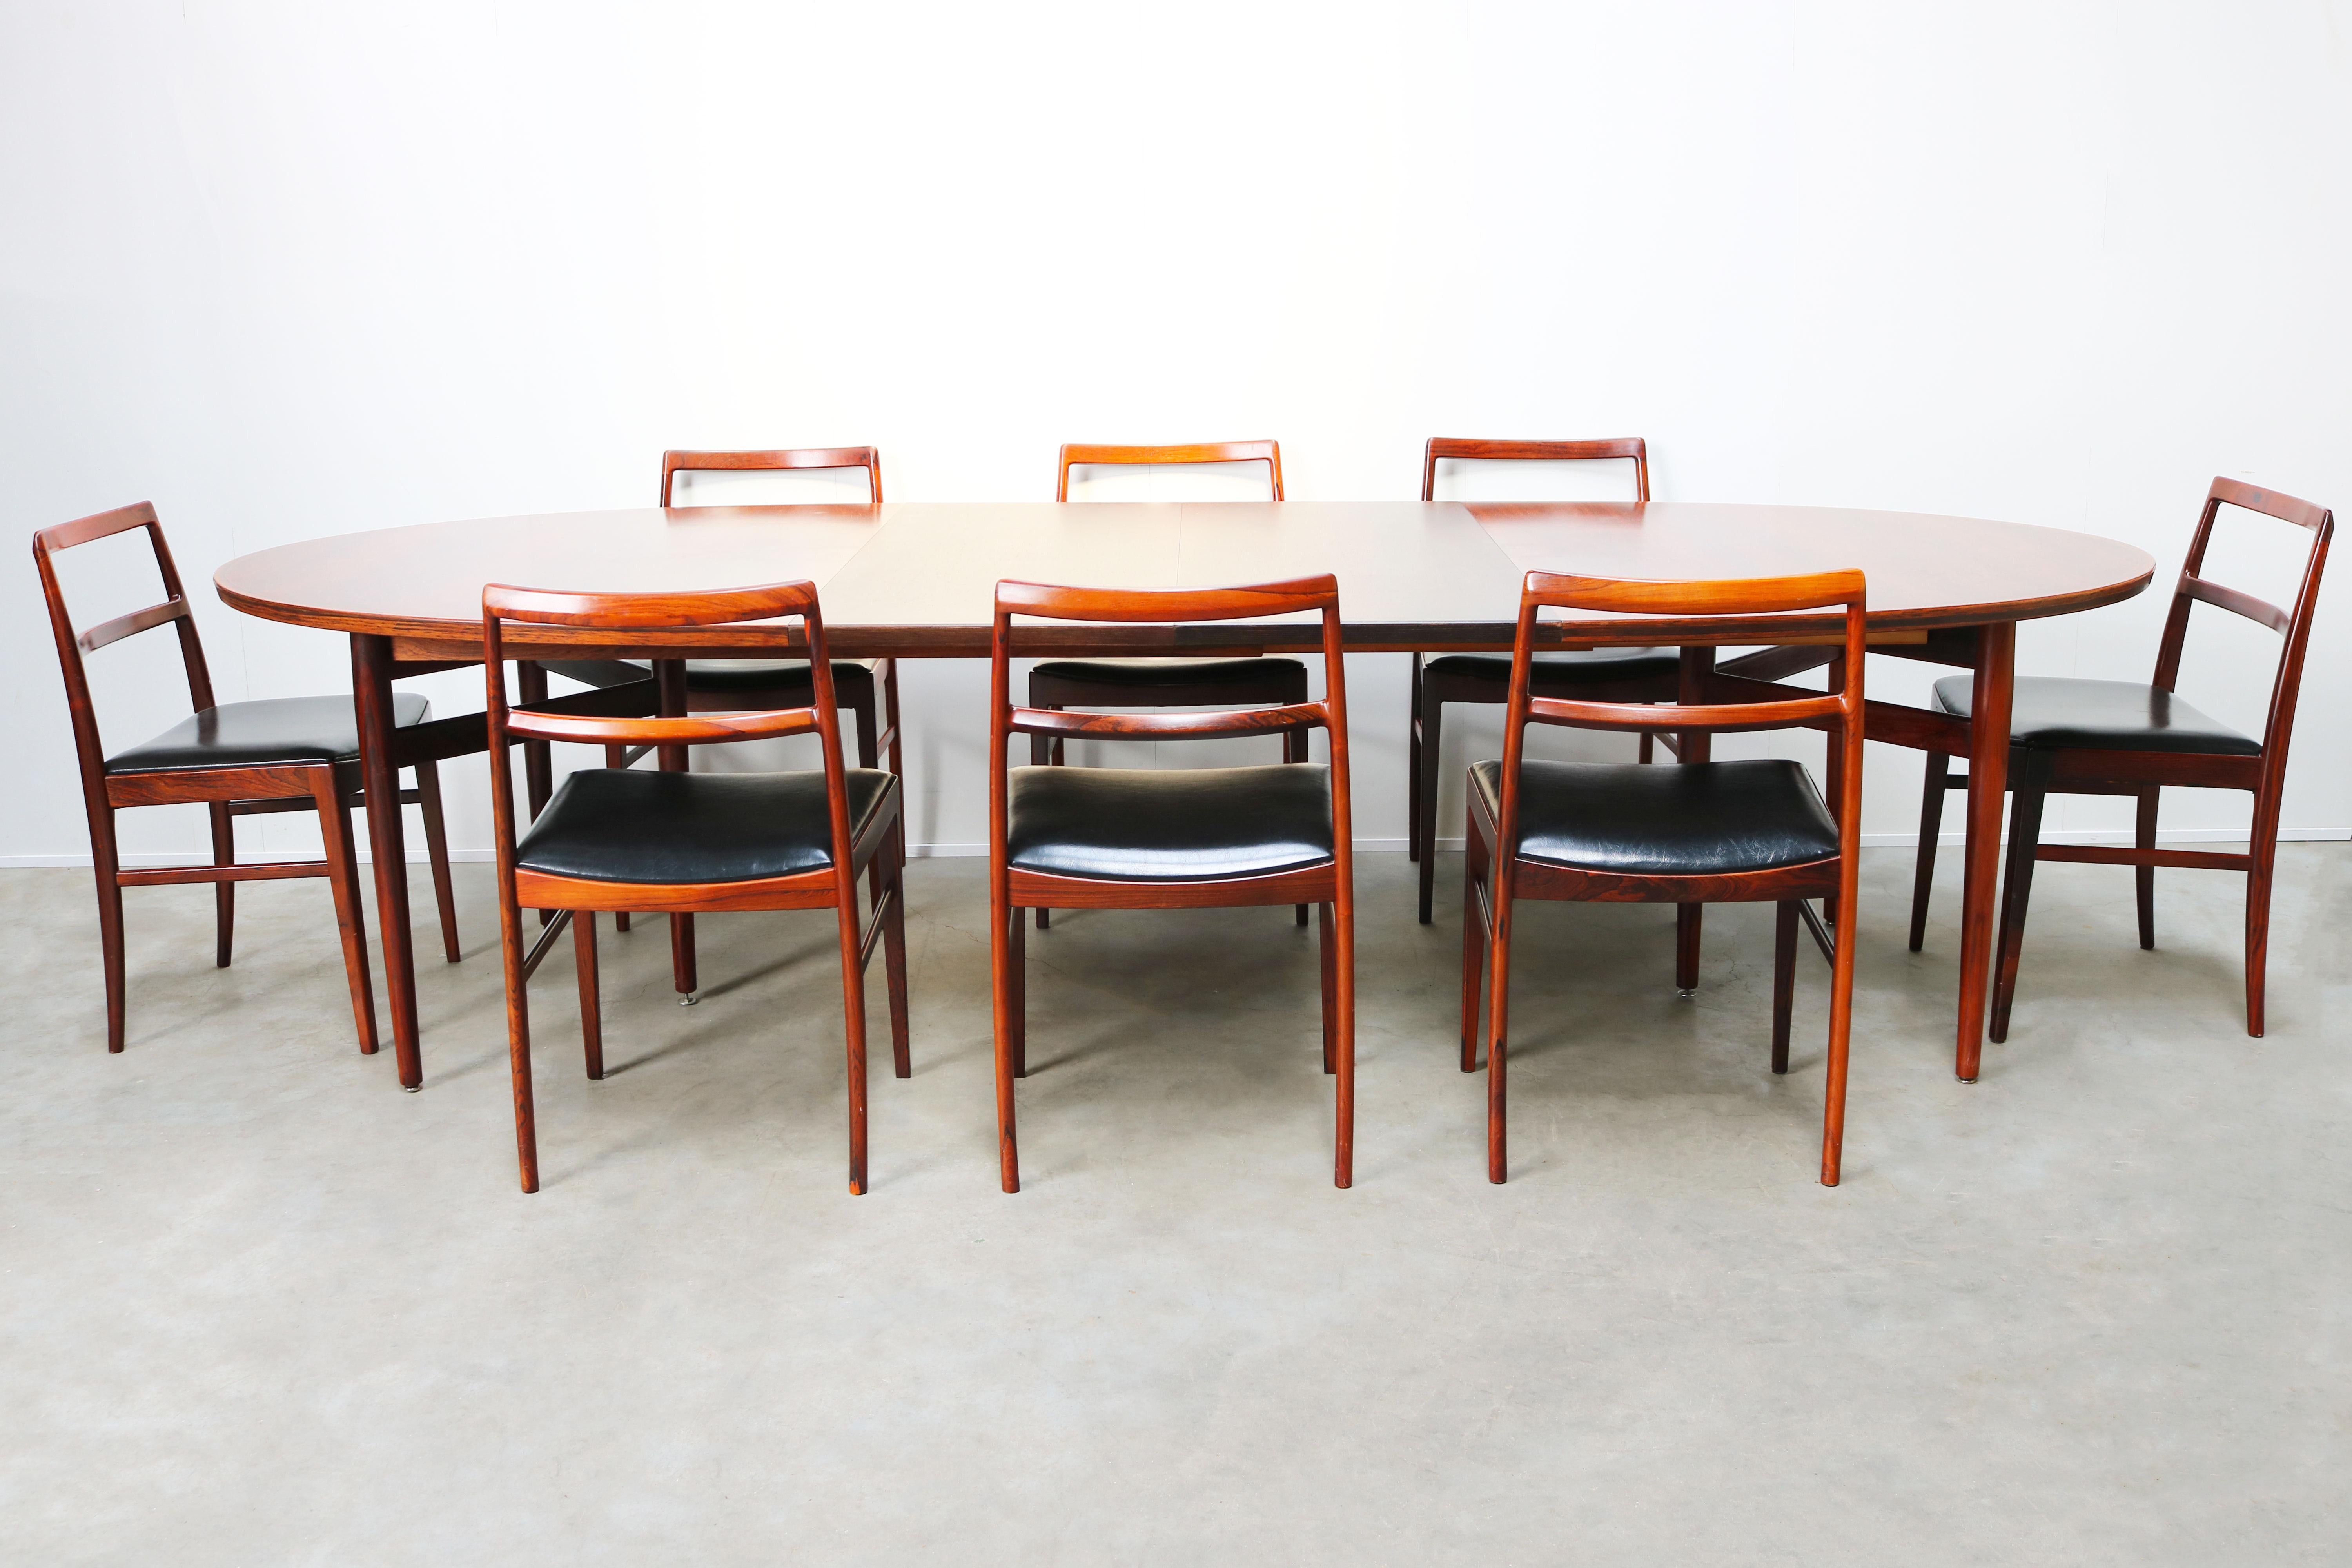 Wonderful and very rare complete dining room set by famous Danish designer: Arne Vodder for Sibast Mobelfabrik in the 1950s. The set conists of eigth Model: 430 dining chairs in rosewood with black leather upholstery and a matching Model: 212 oval